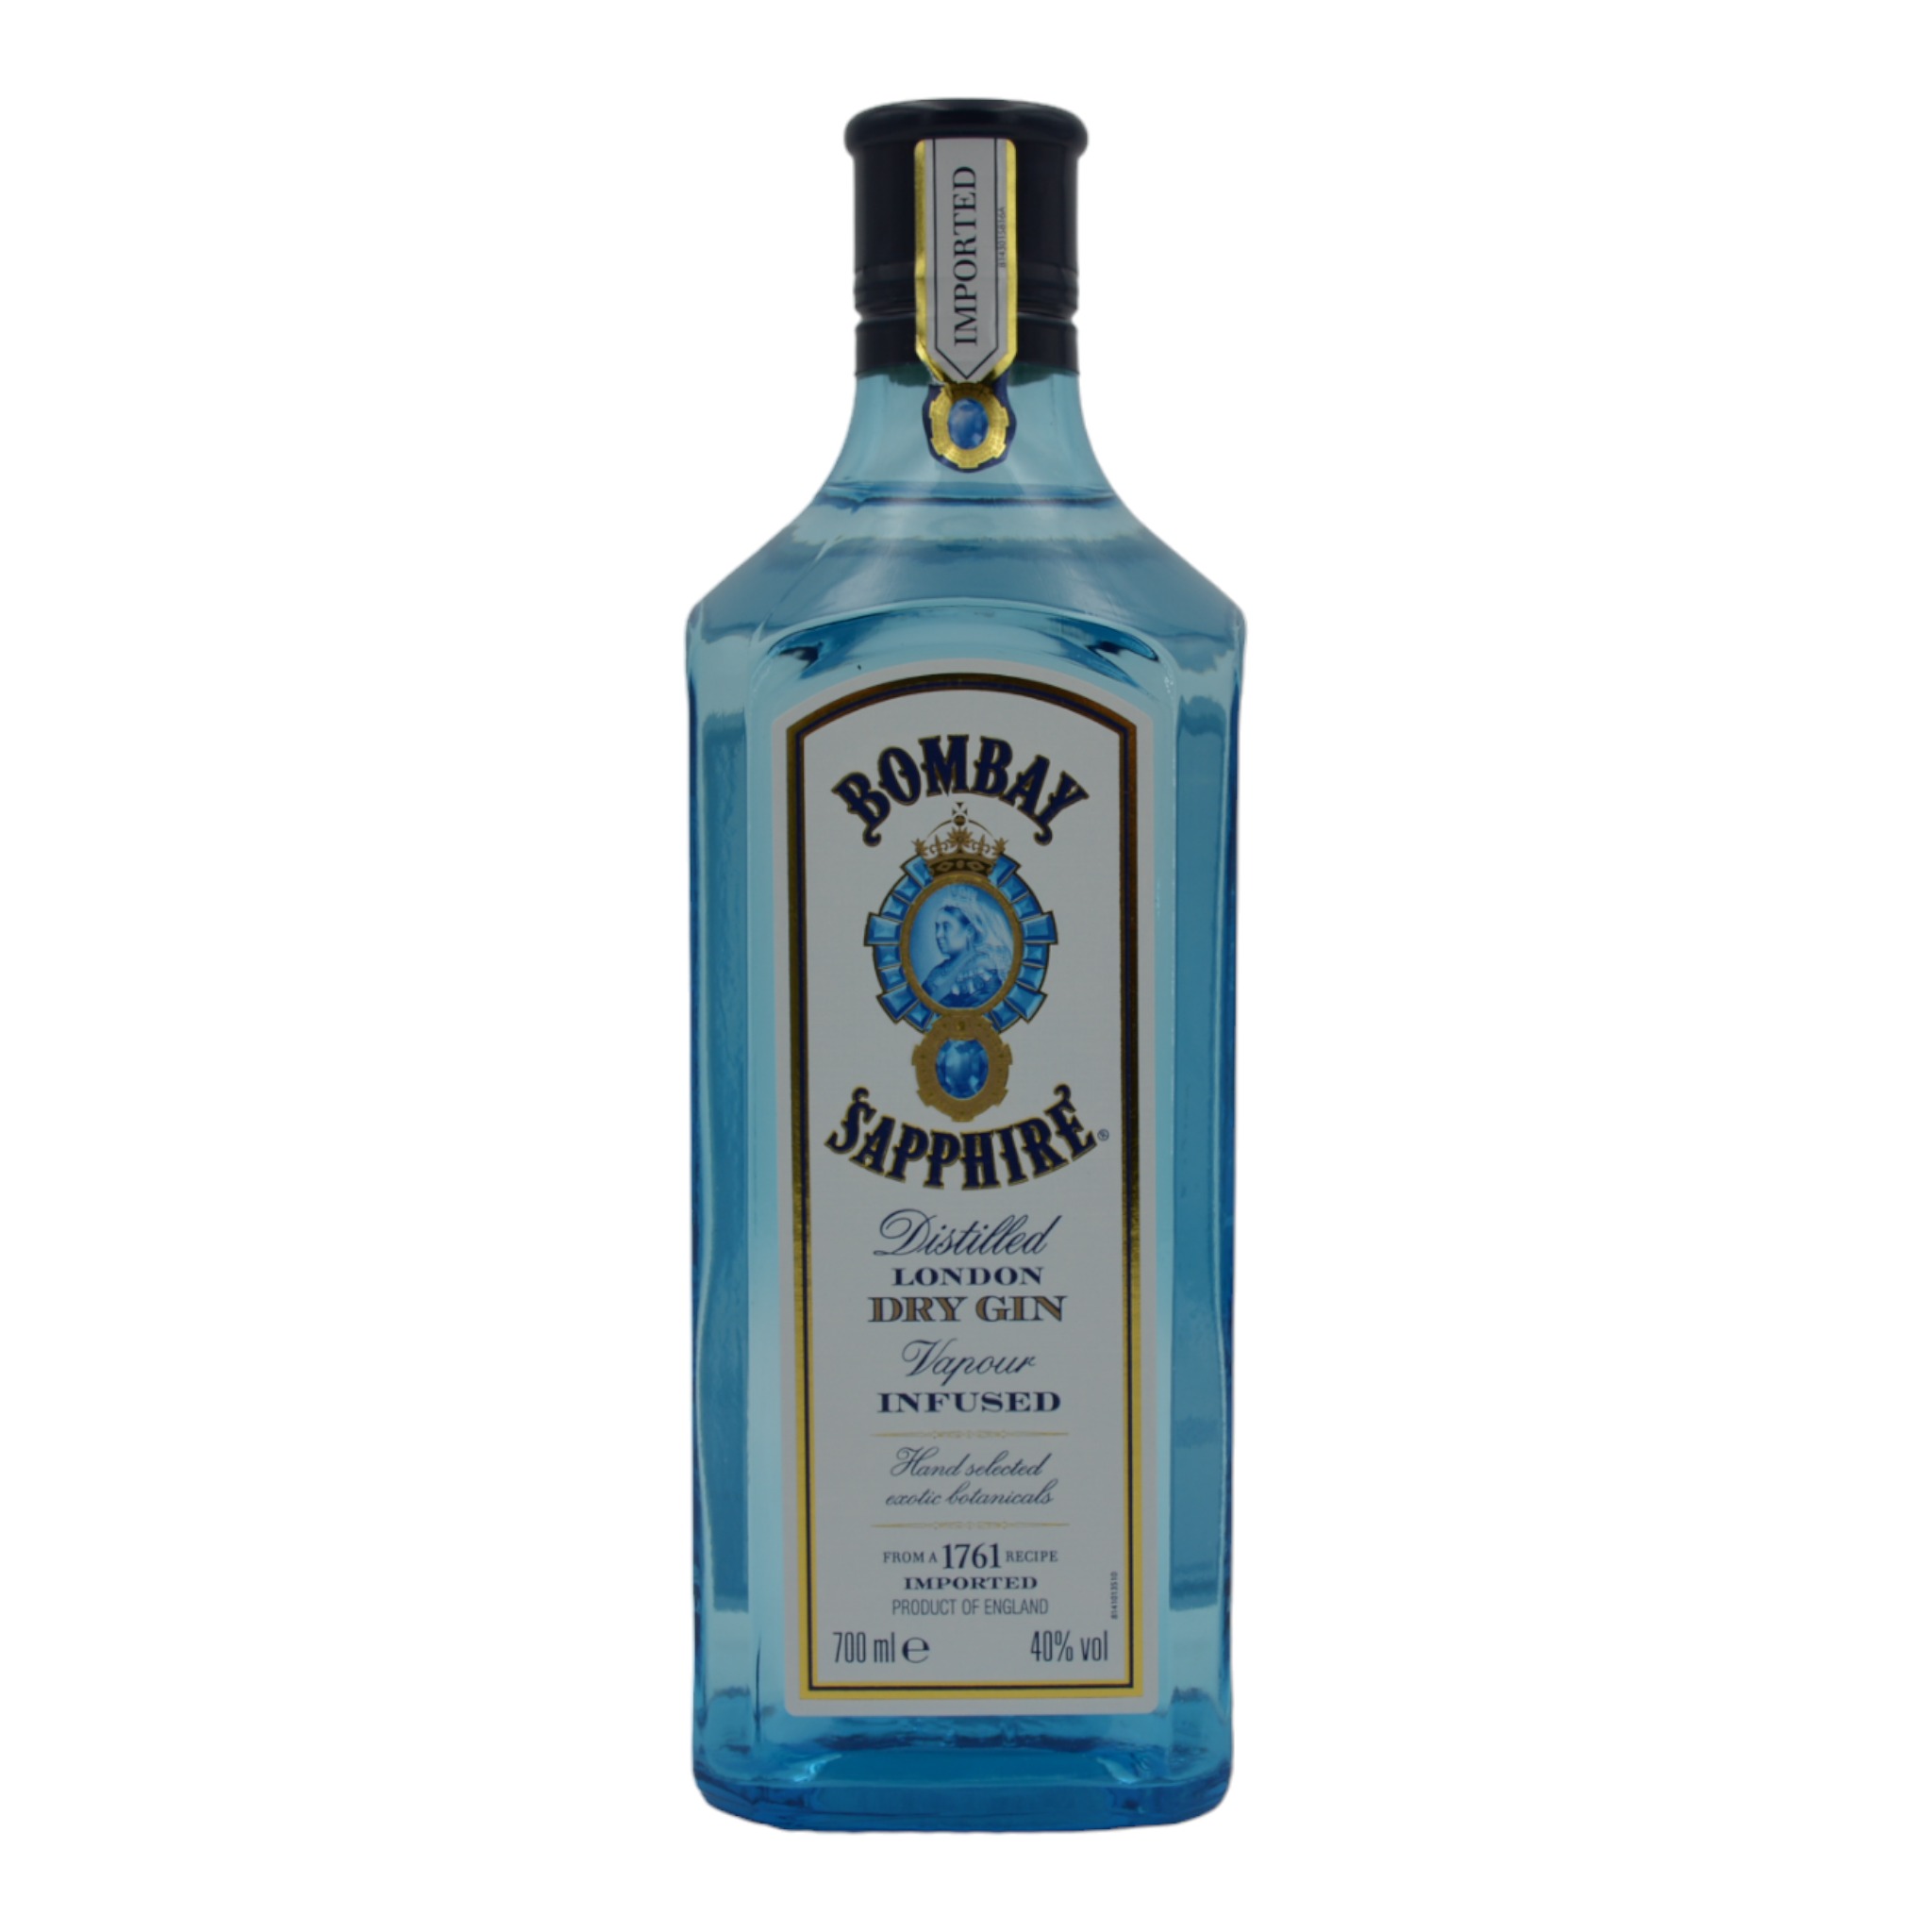 5010677714006Bombay Sapphire London Dry Gin Vapour infused f - Weinhaus-Buecker